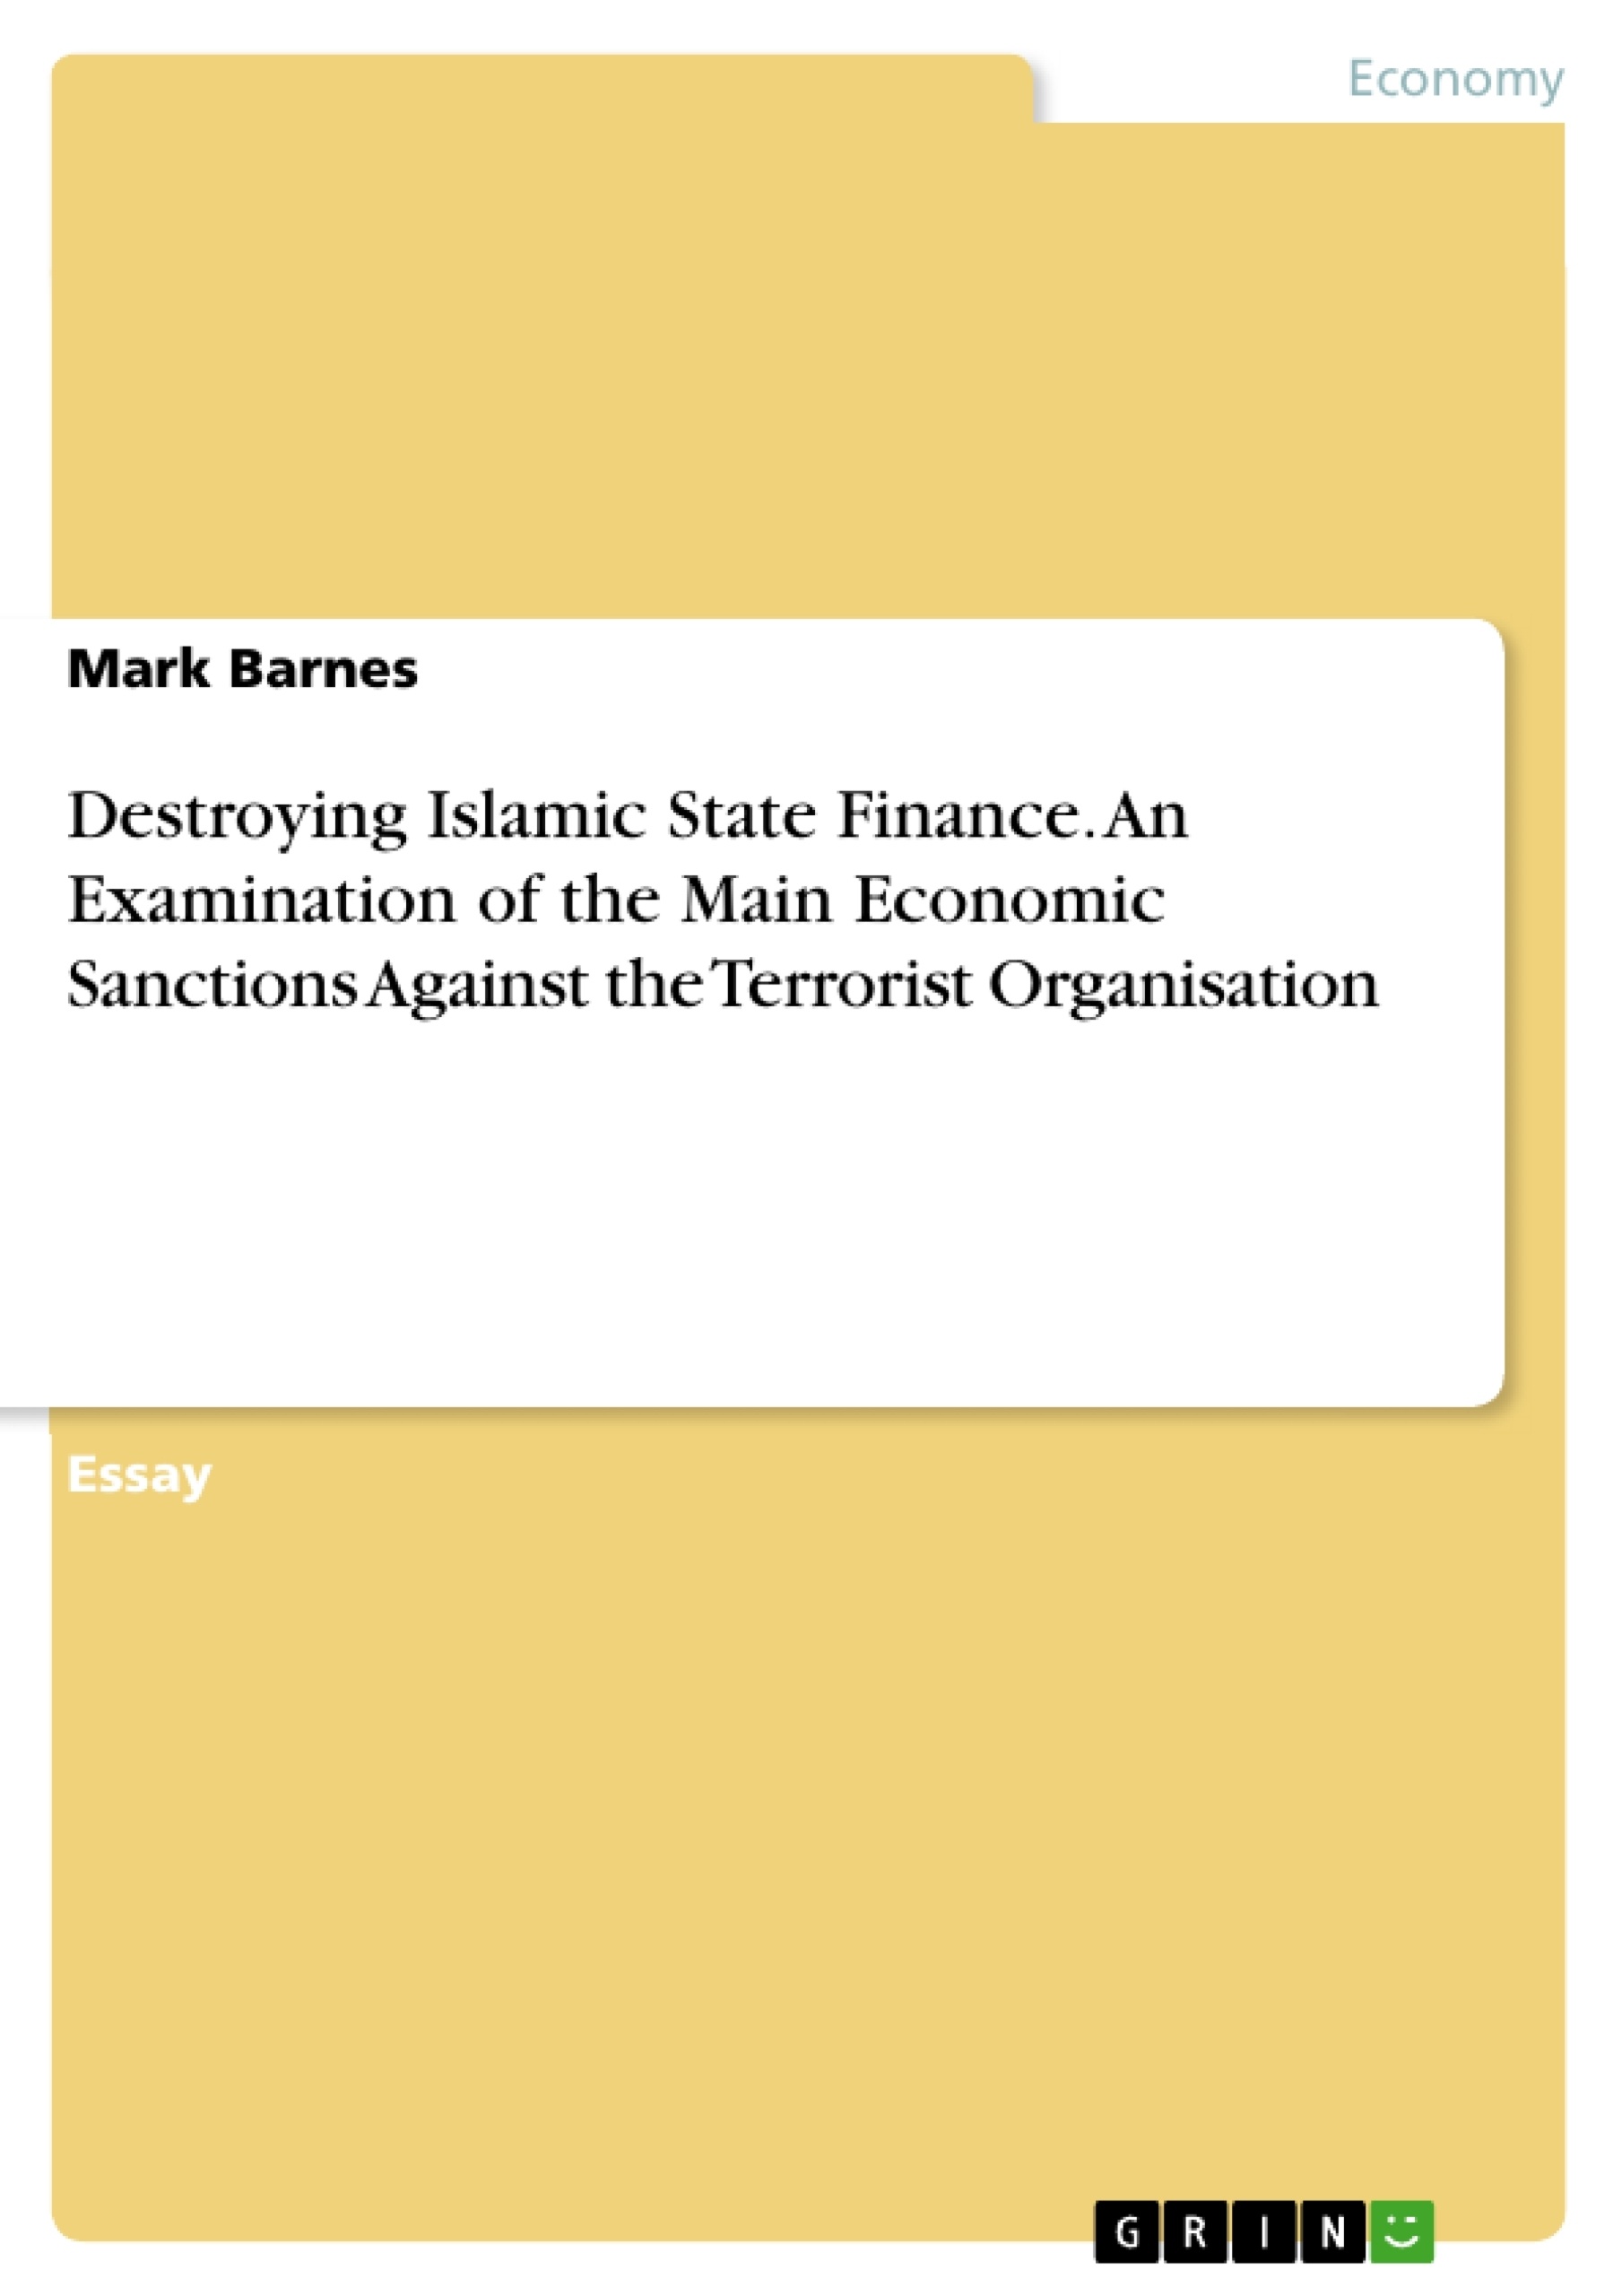 Titre: Destroying Islamic State Finance. An Examination of the Main Economic Sanctions Against the Terrorist Organisation